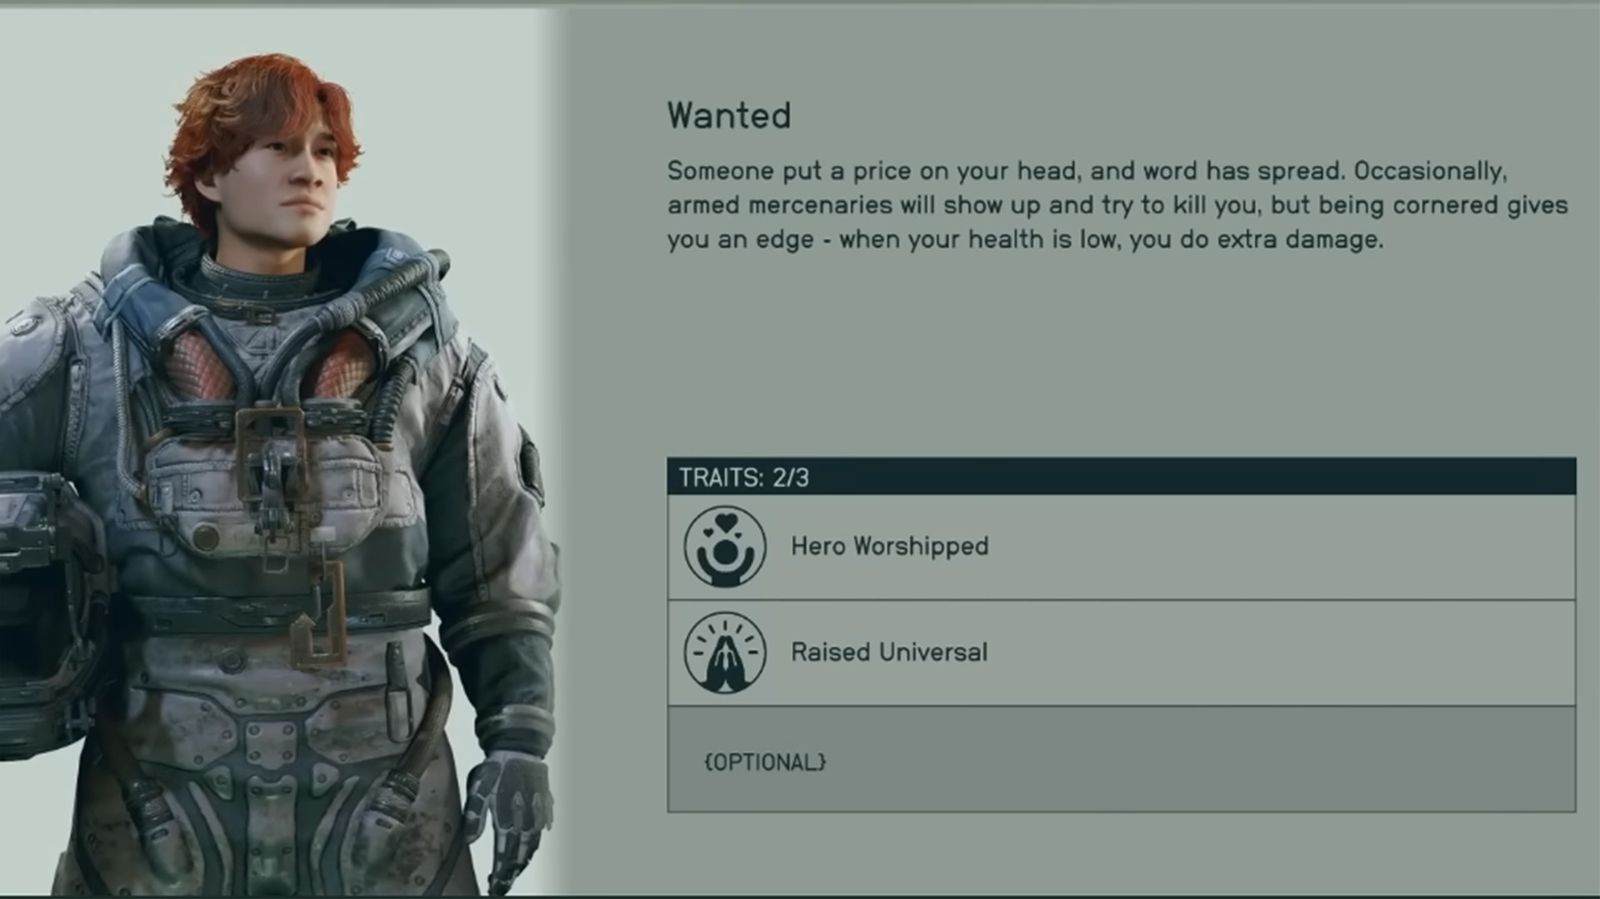 A screenshot of the Wanted trait in Starfield. 